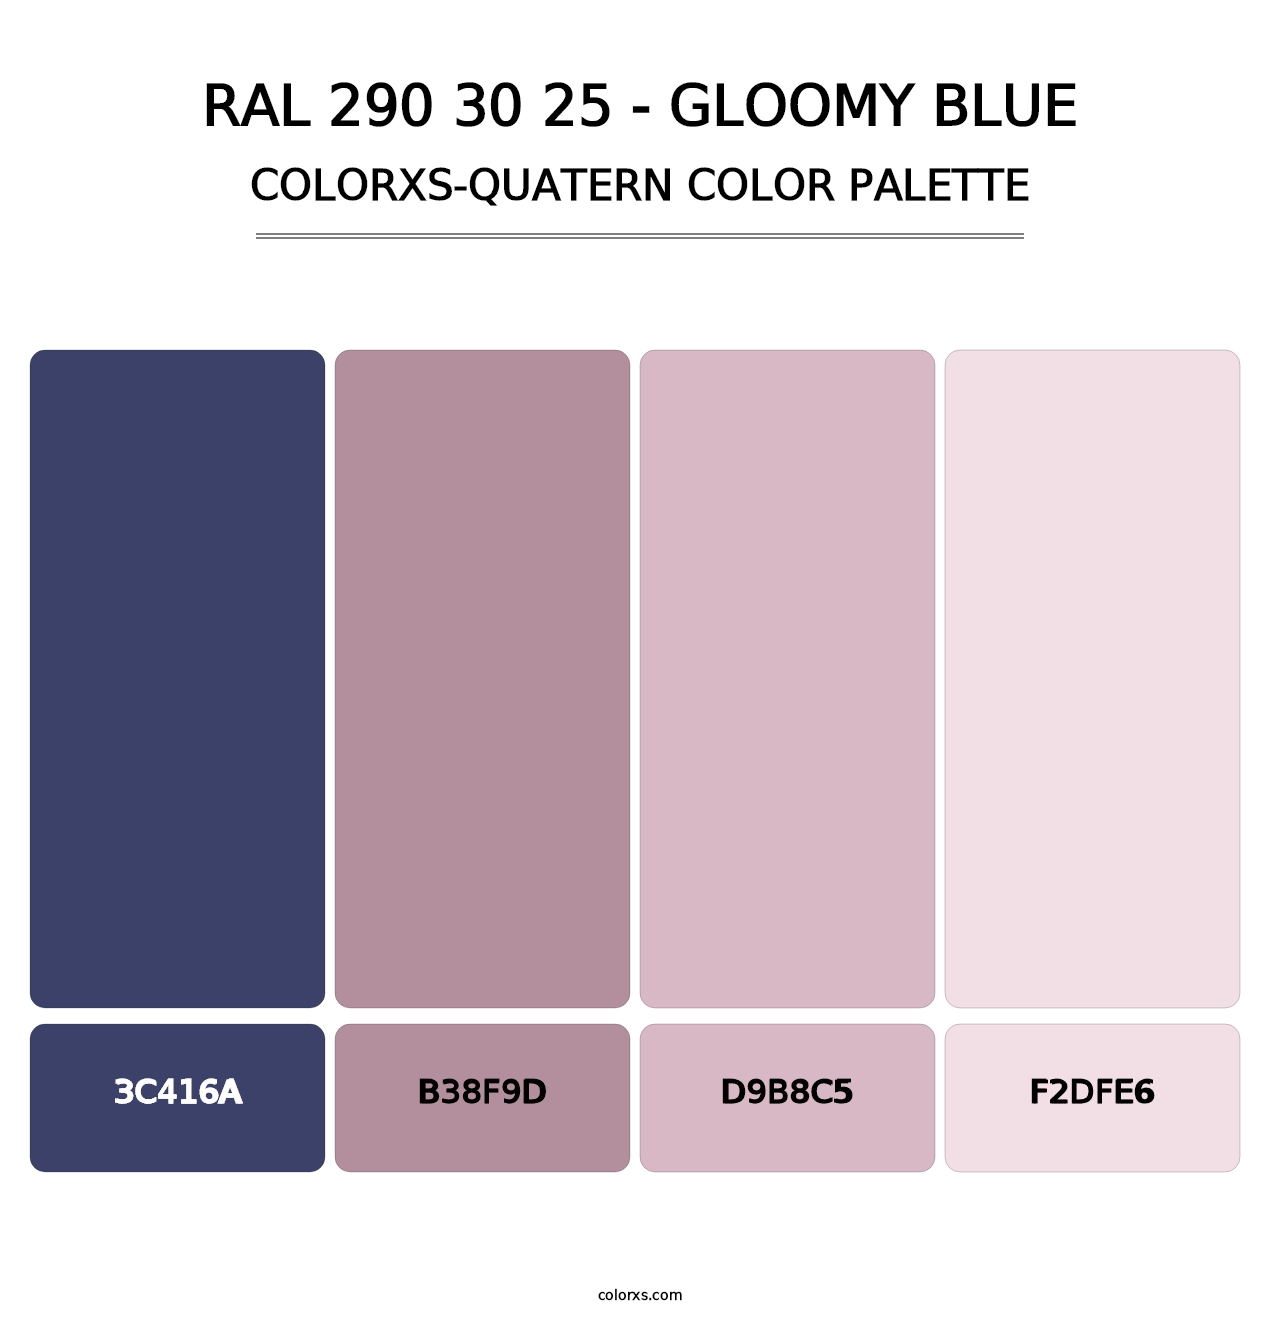 RAL 290 30 25 - Gloomy Blue - Colorxs Quatern Palette